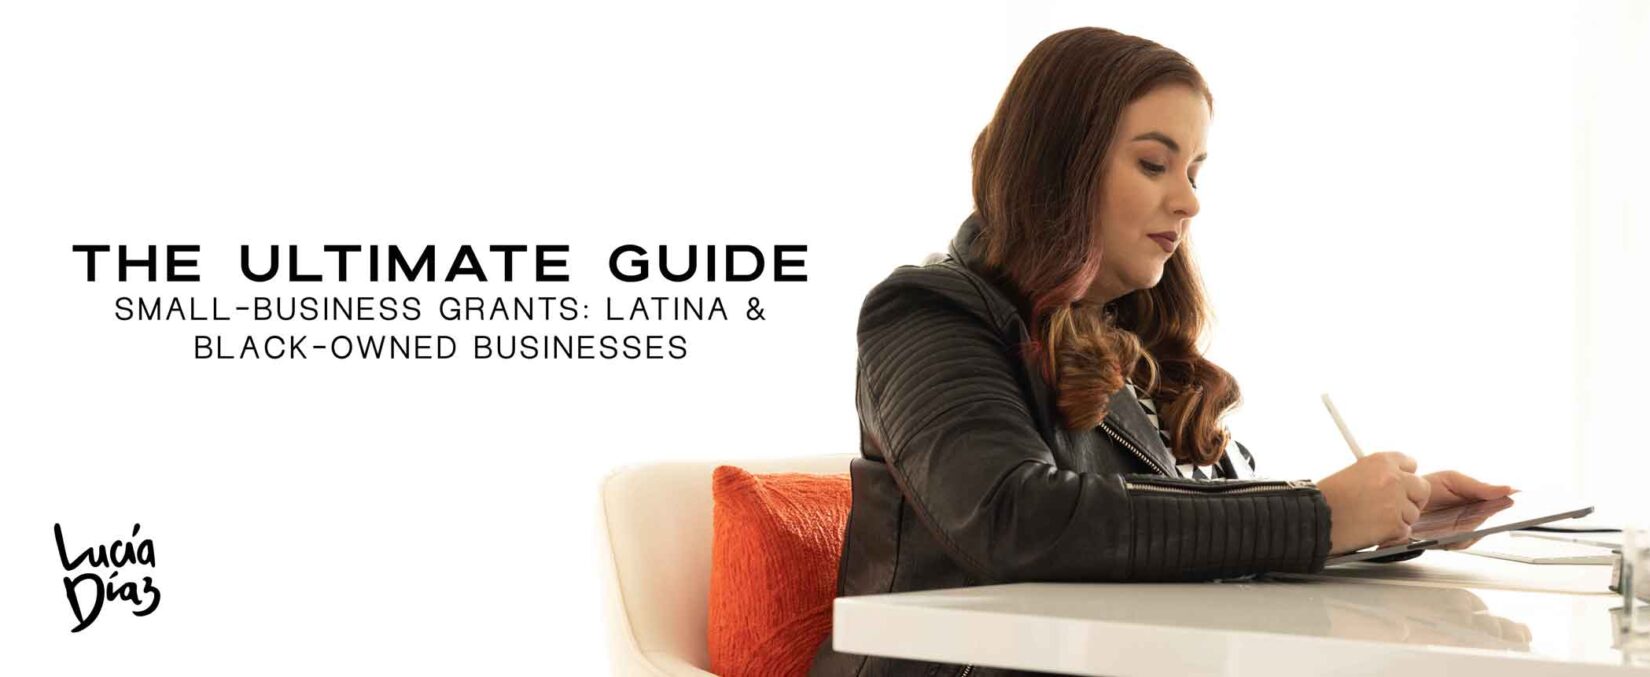 The Ultimate Guide to Small Business Grants for Latina & BlackOwned